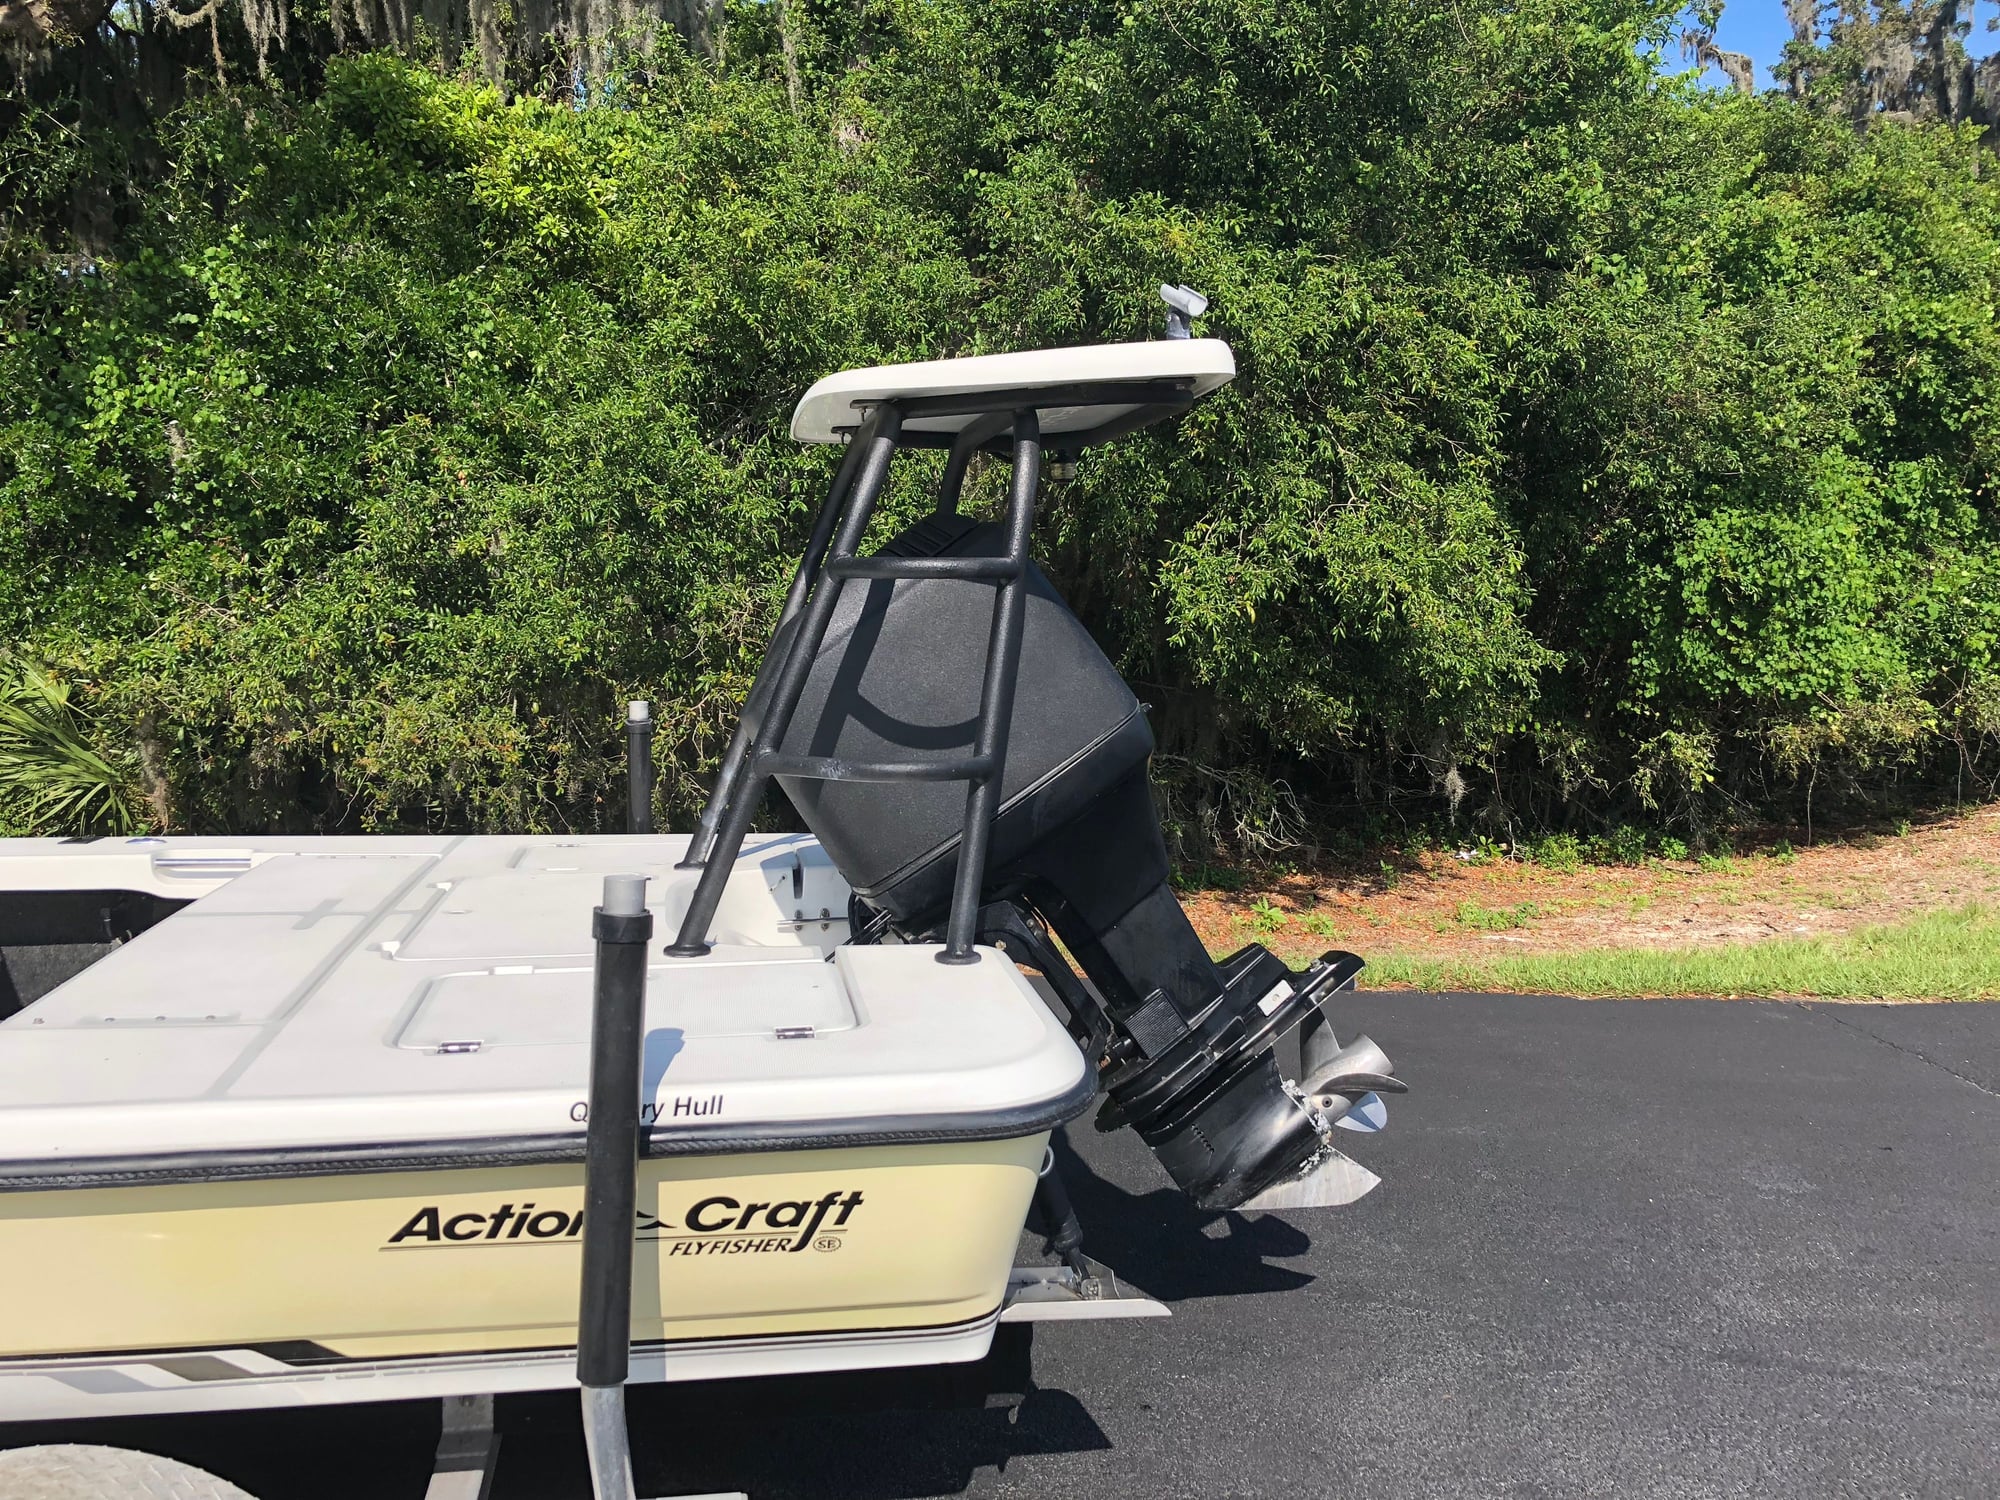 2001 Action Craft 1720 se $10,900 - The Hull Truth - Boating and